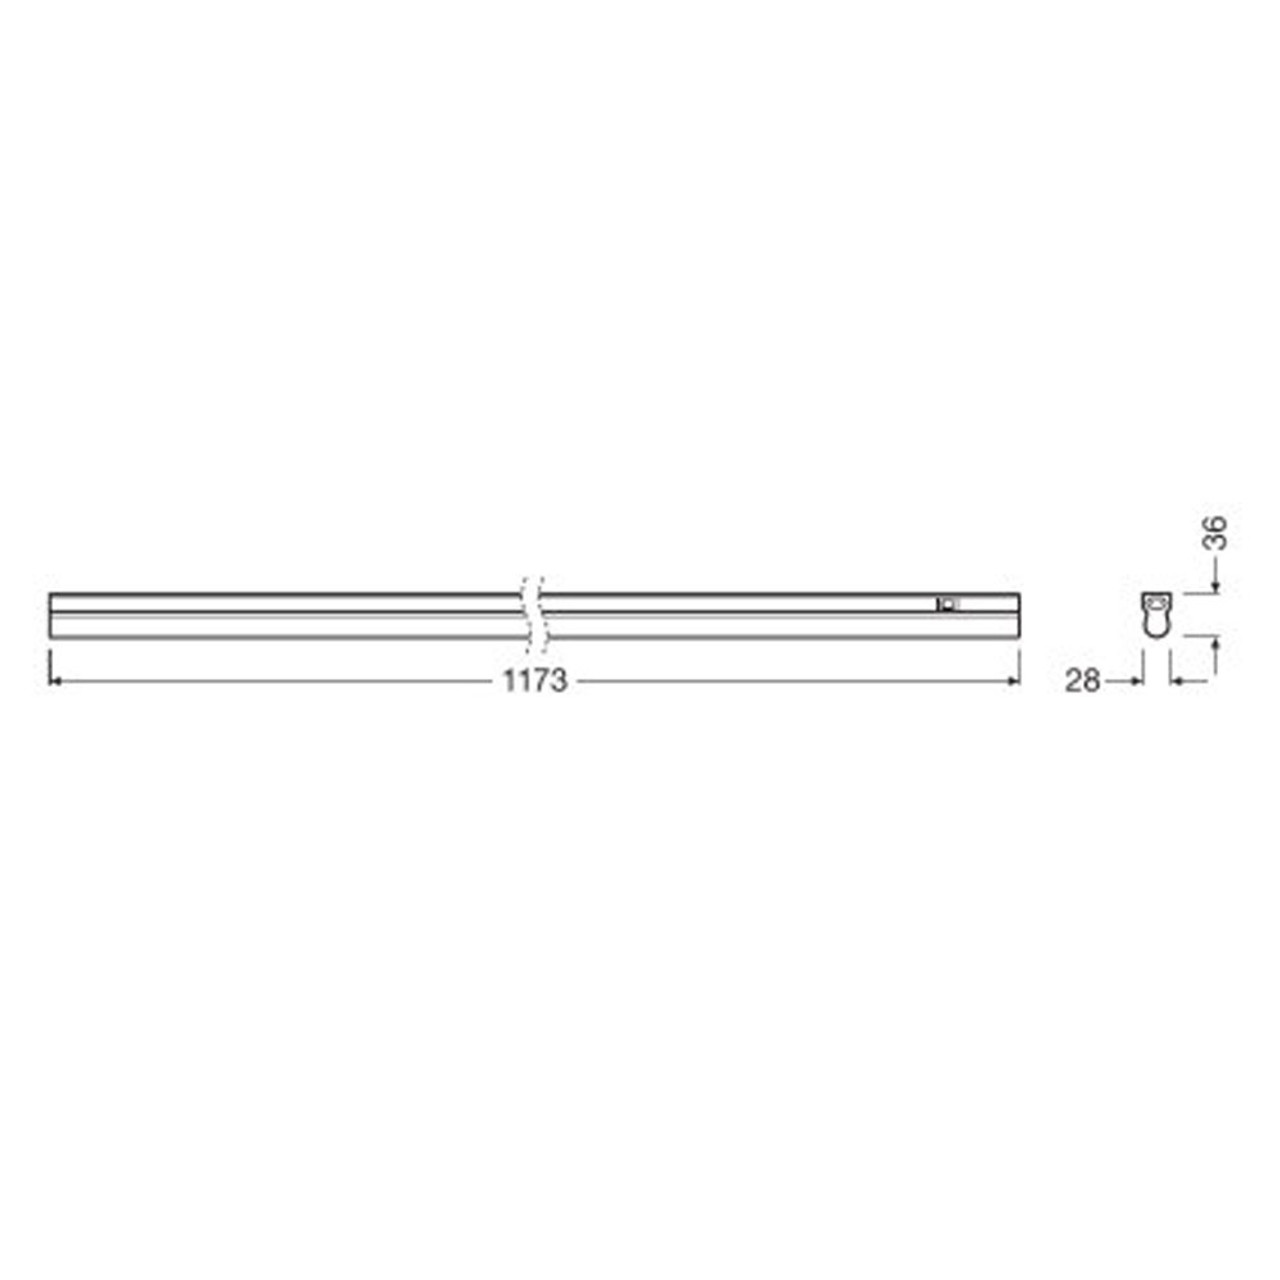 Ledvance Linear LED Switched 17W Batten 1473mm Cool White IP20